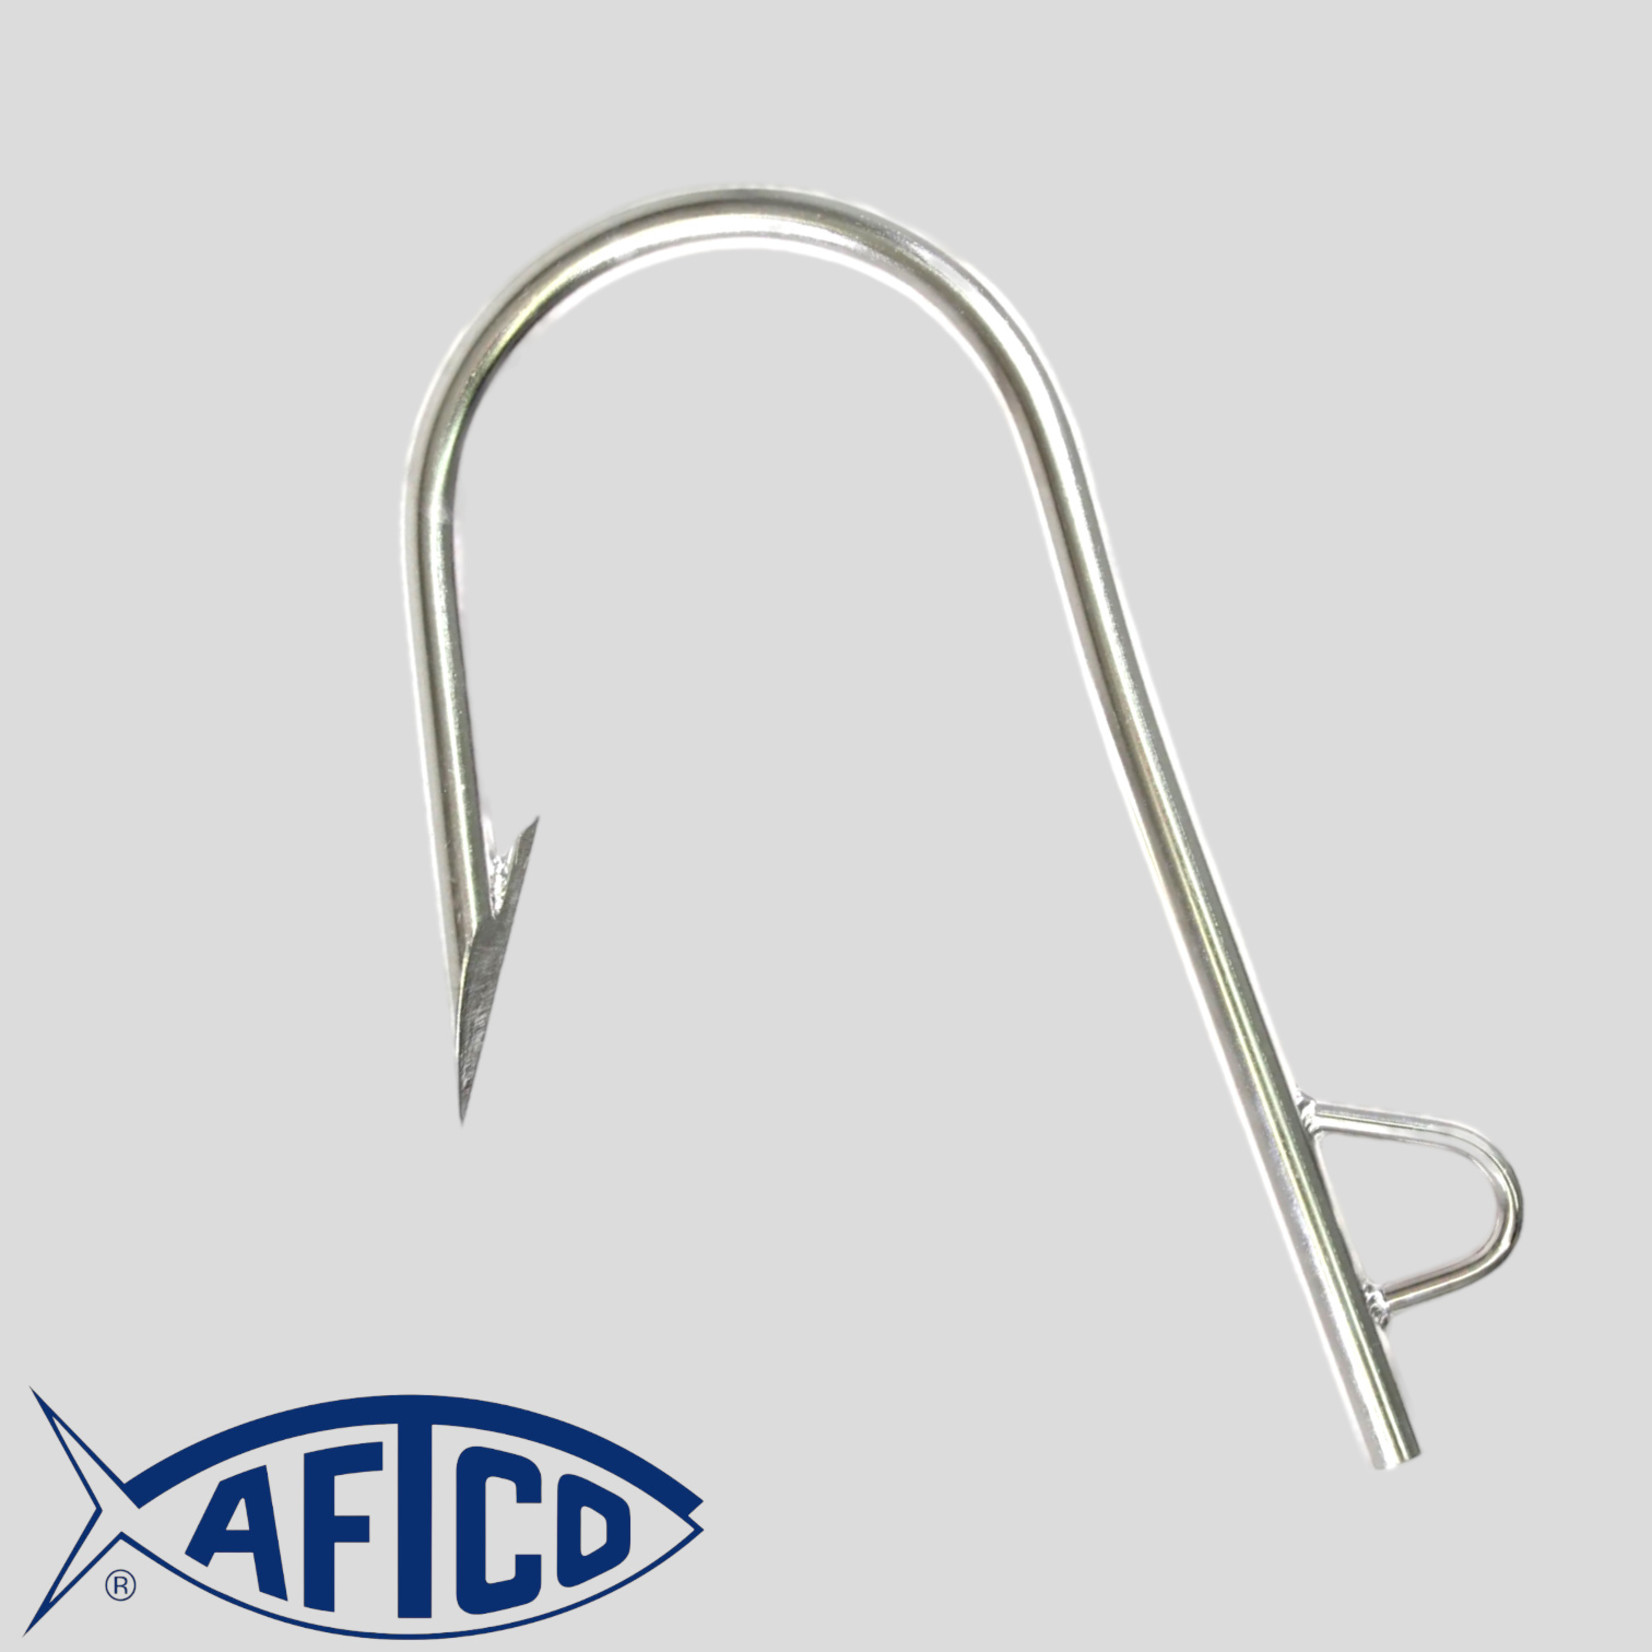 Aftco Gaff - Tyalure Tackle